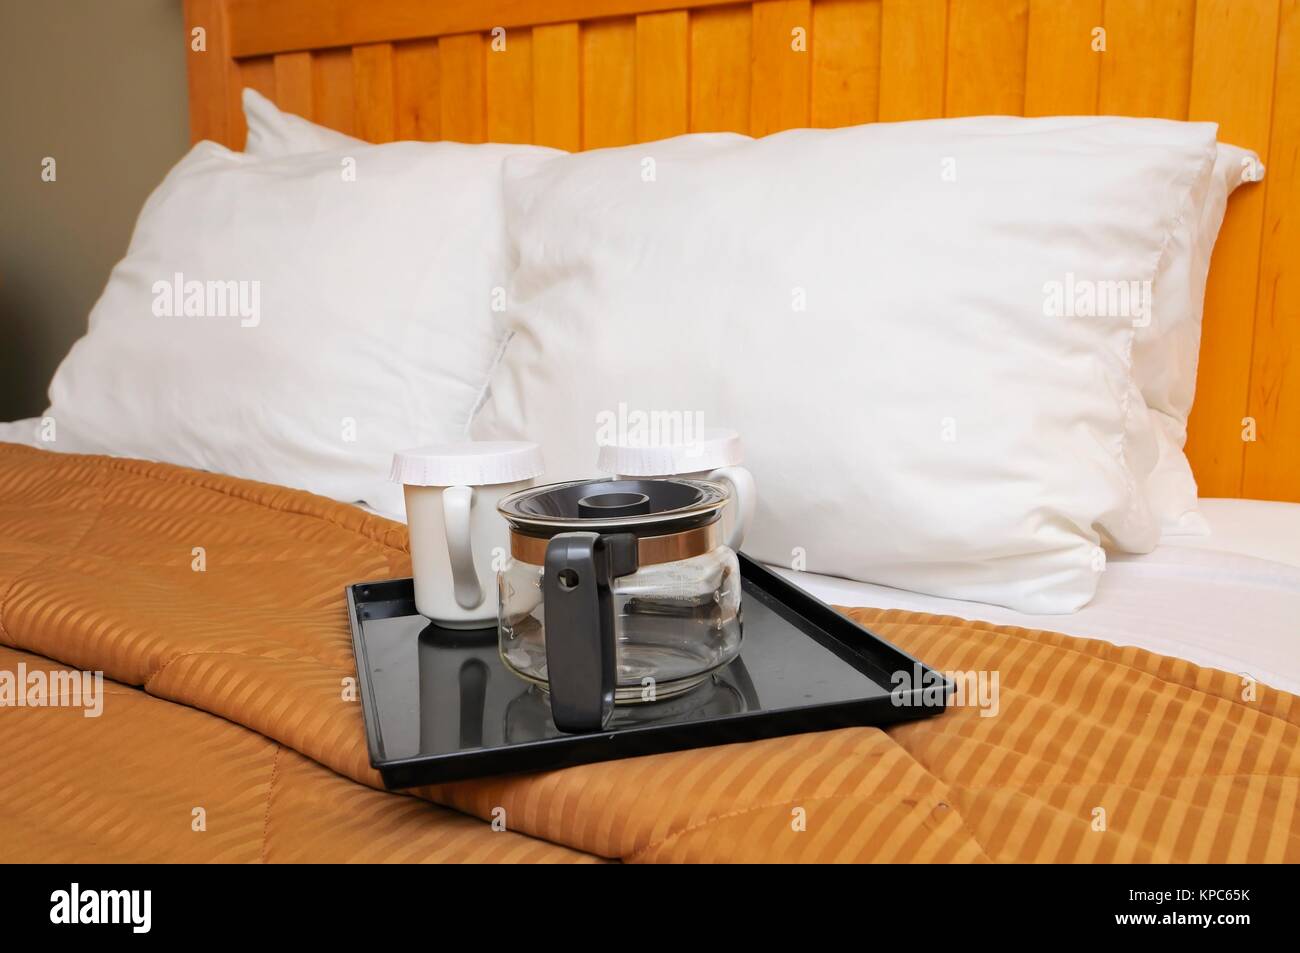 Coffee or tea maker and cups on bed for relaxed breakfast. Stock Photo